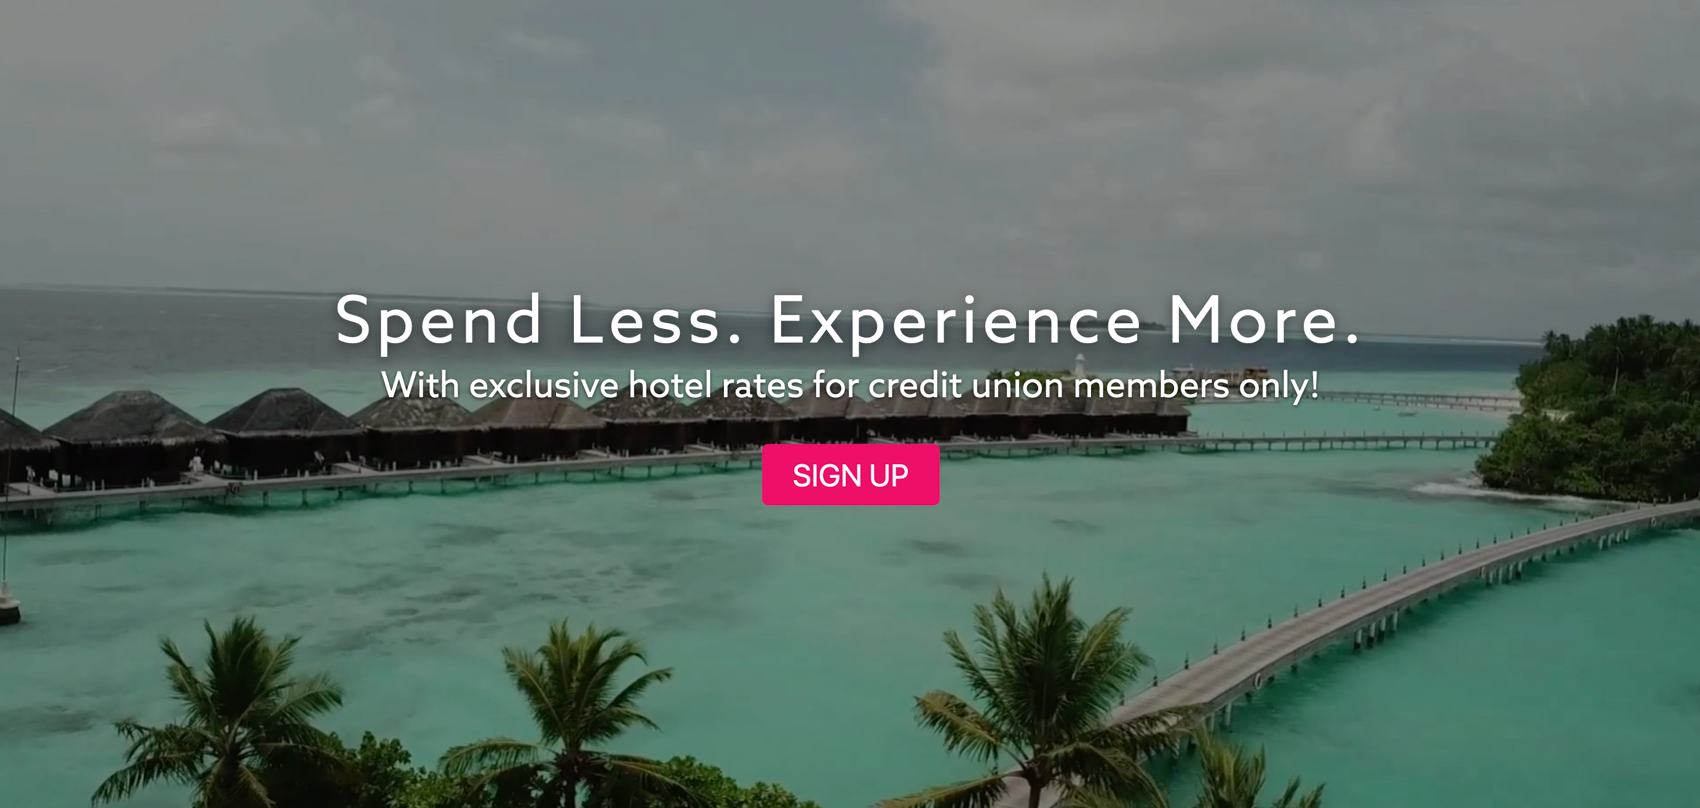 Credit Union Travel Club spend less experience more